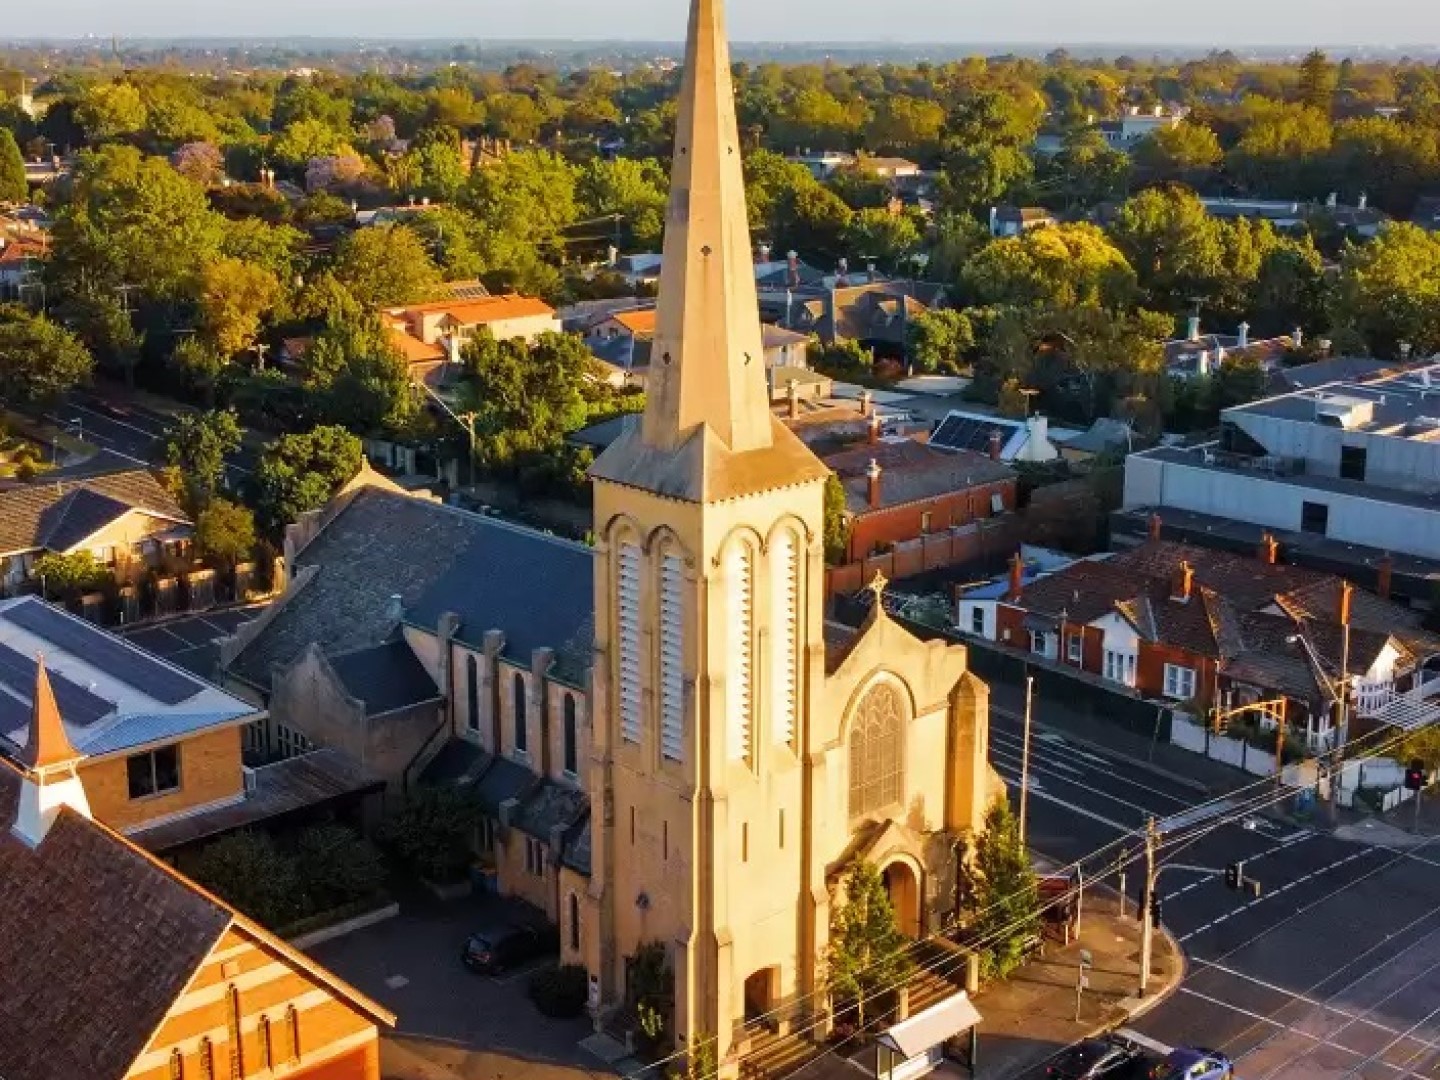 An aerial view of the spire of St Mark's Anglican Church in the setting sun